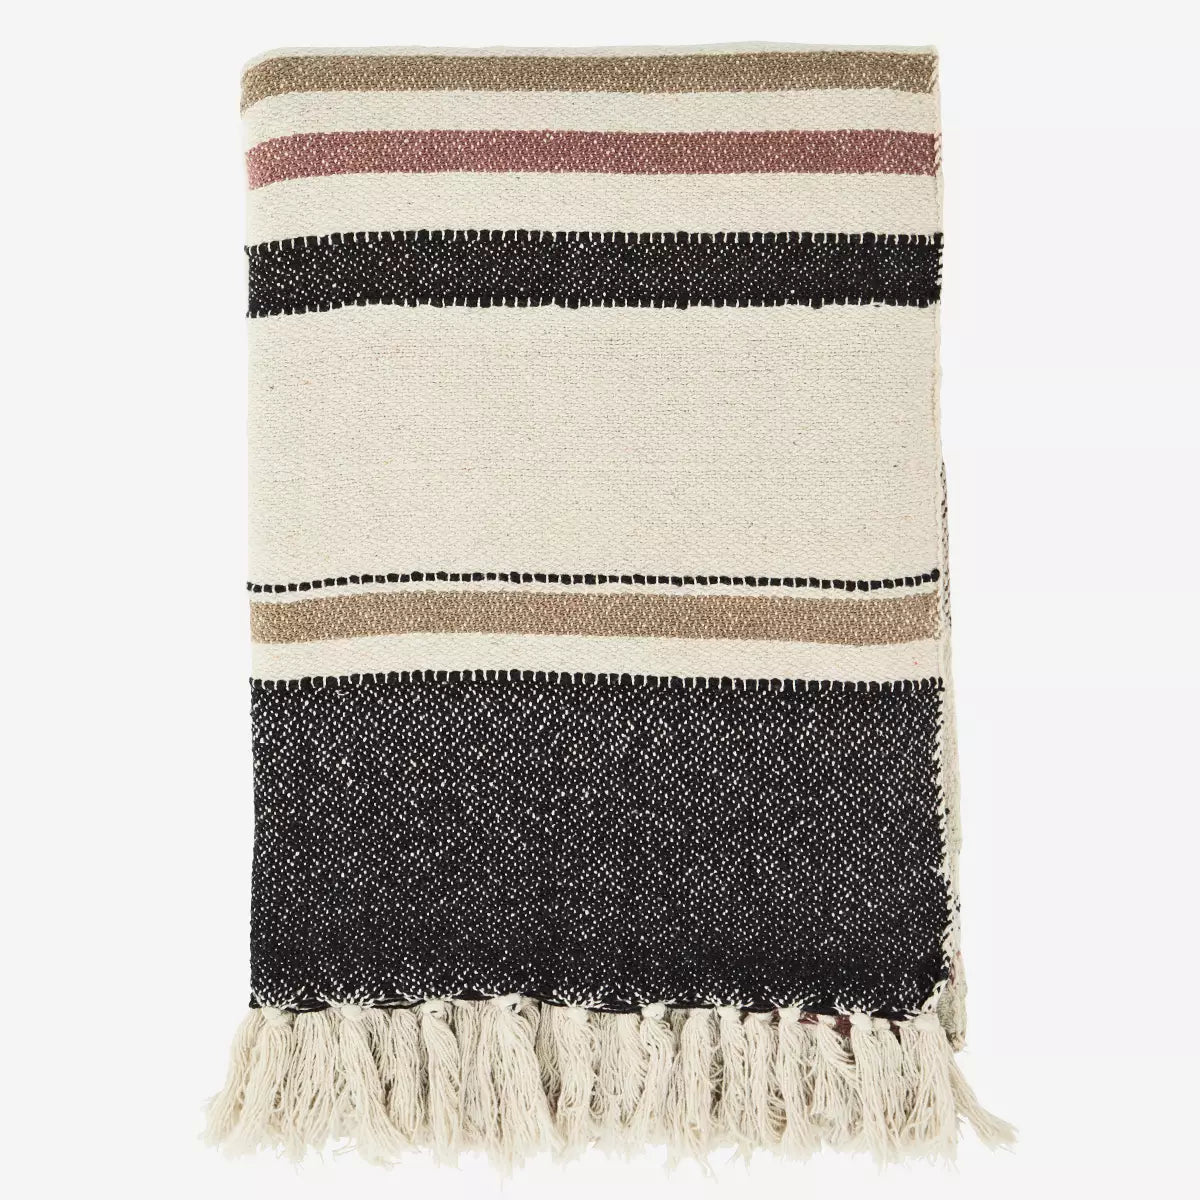 Black, Sand, Dusty Pink & Off White Recycled Cotton Throw